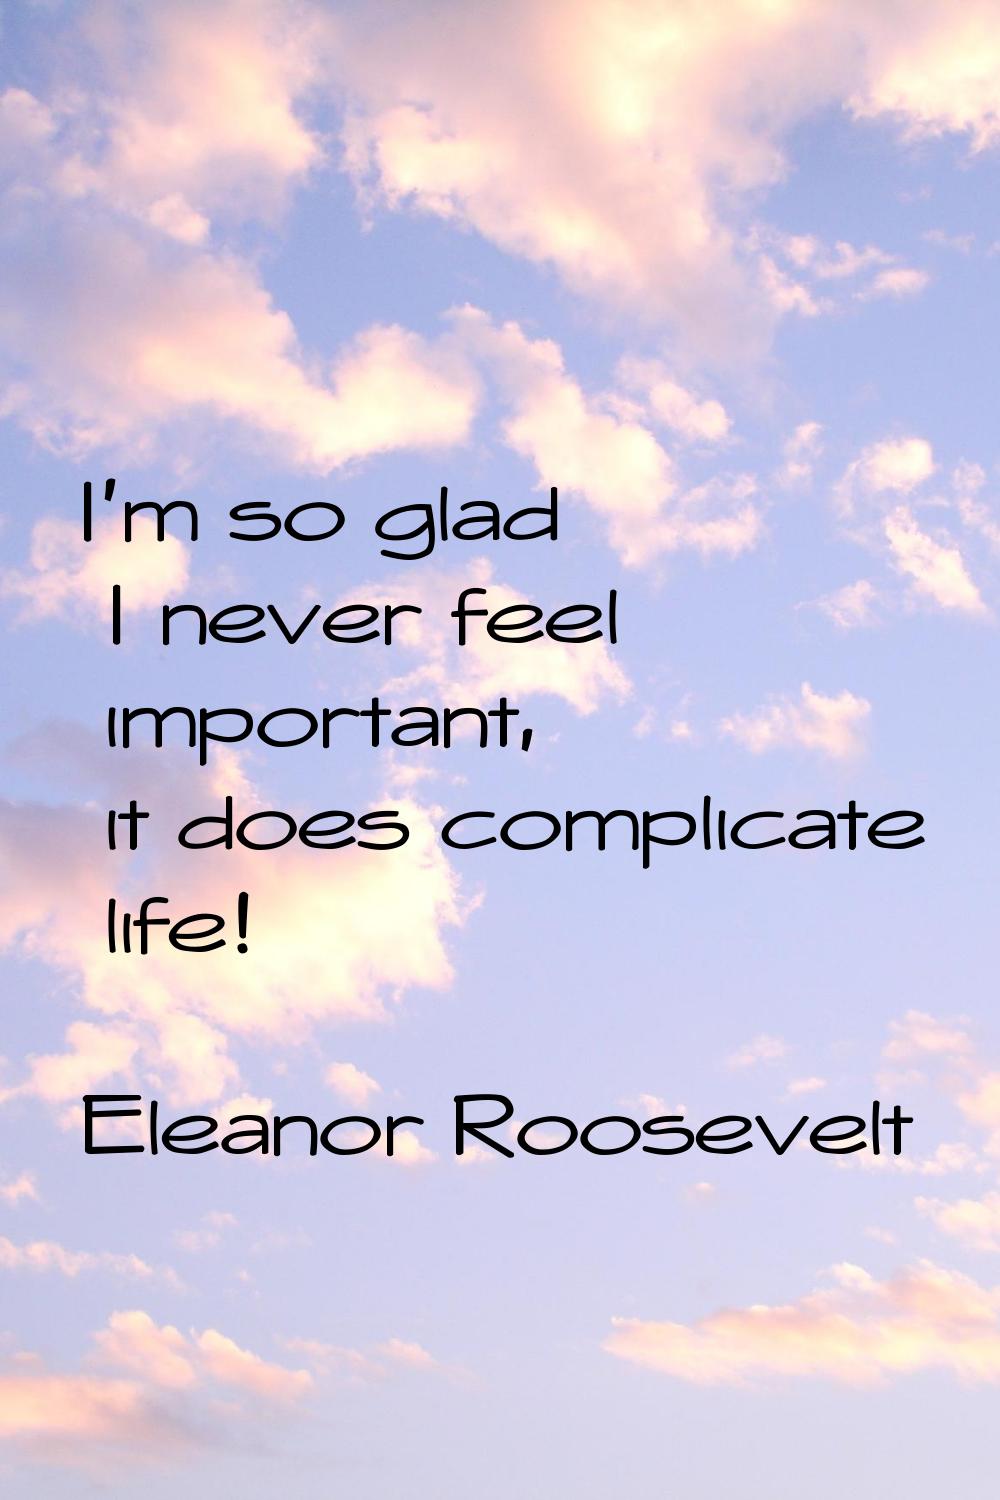 I'm so glad I never feel important, it does complicate life!